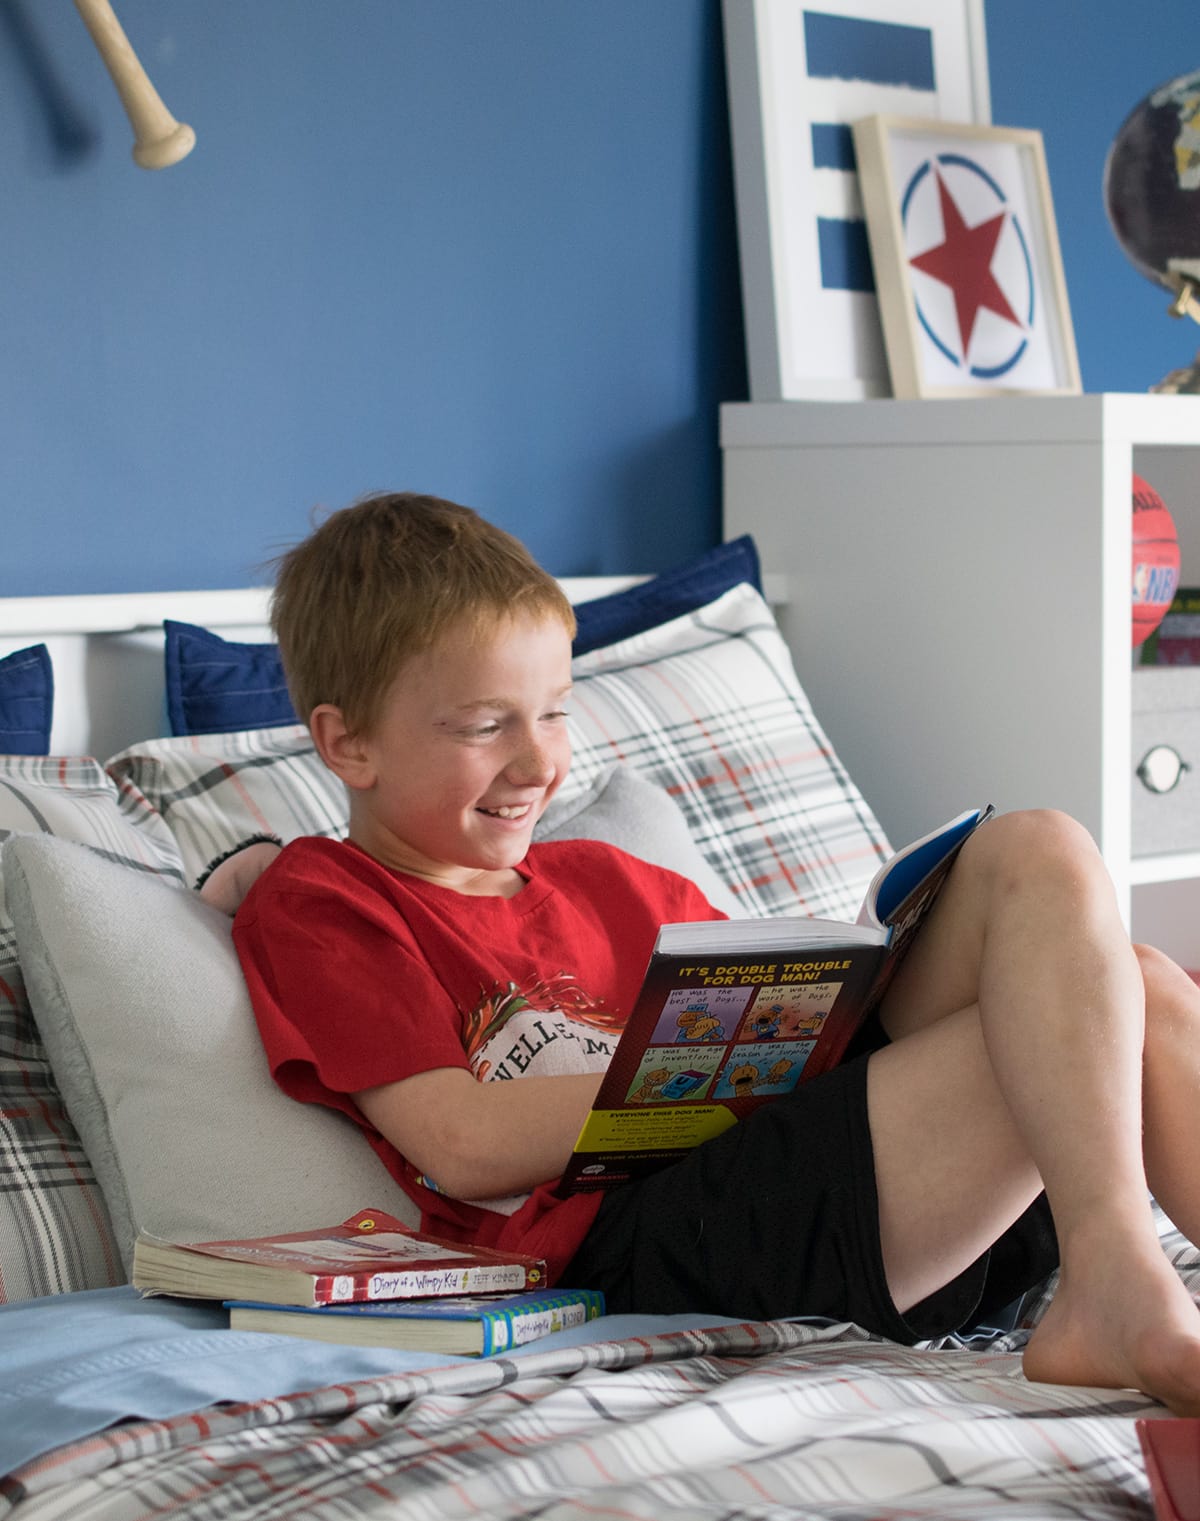 Author's son reading and enjoying his new bedroom makeover